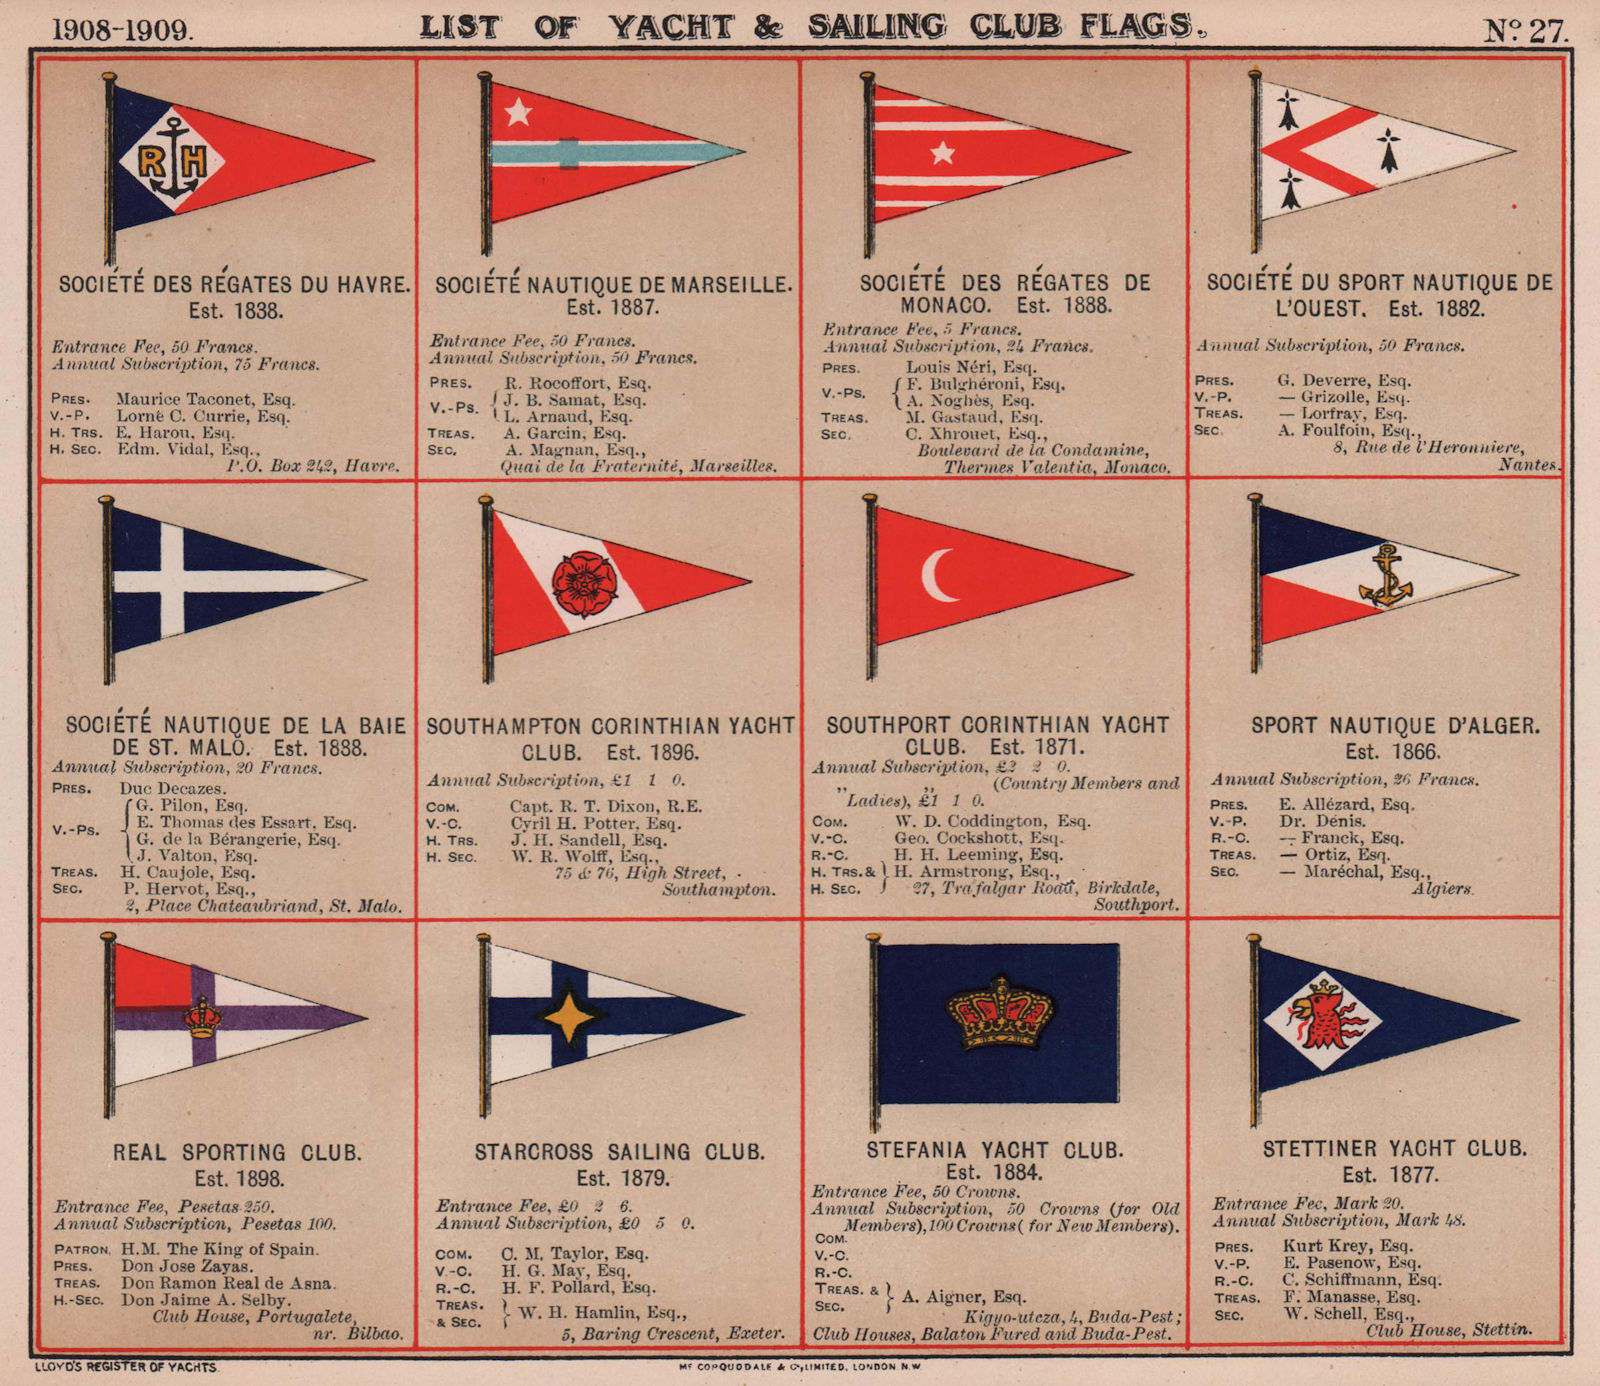 YACHT & SAILING CLUB FLAGS S Havre Marseille Monaco St Malo Southport 1908